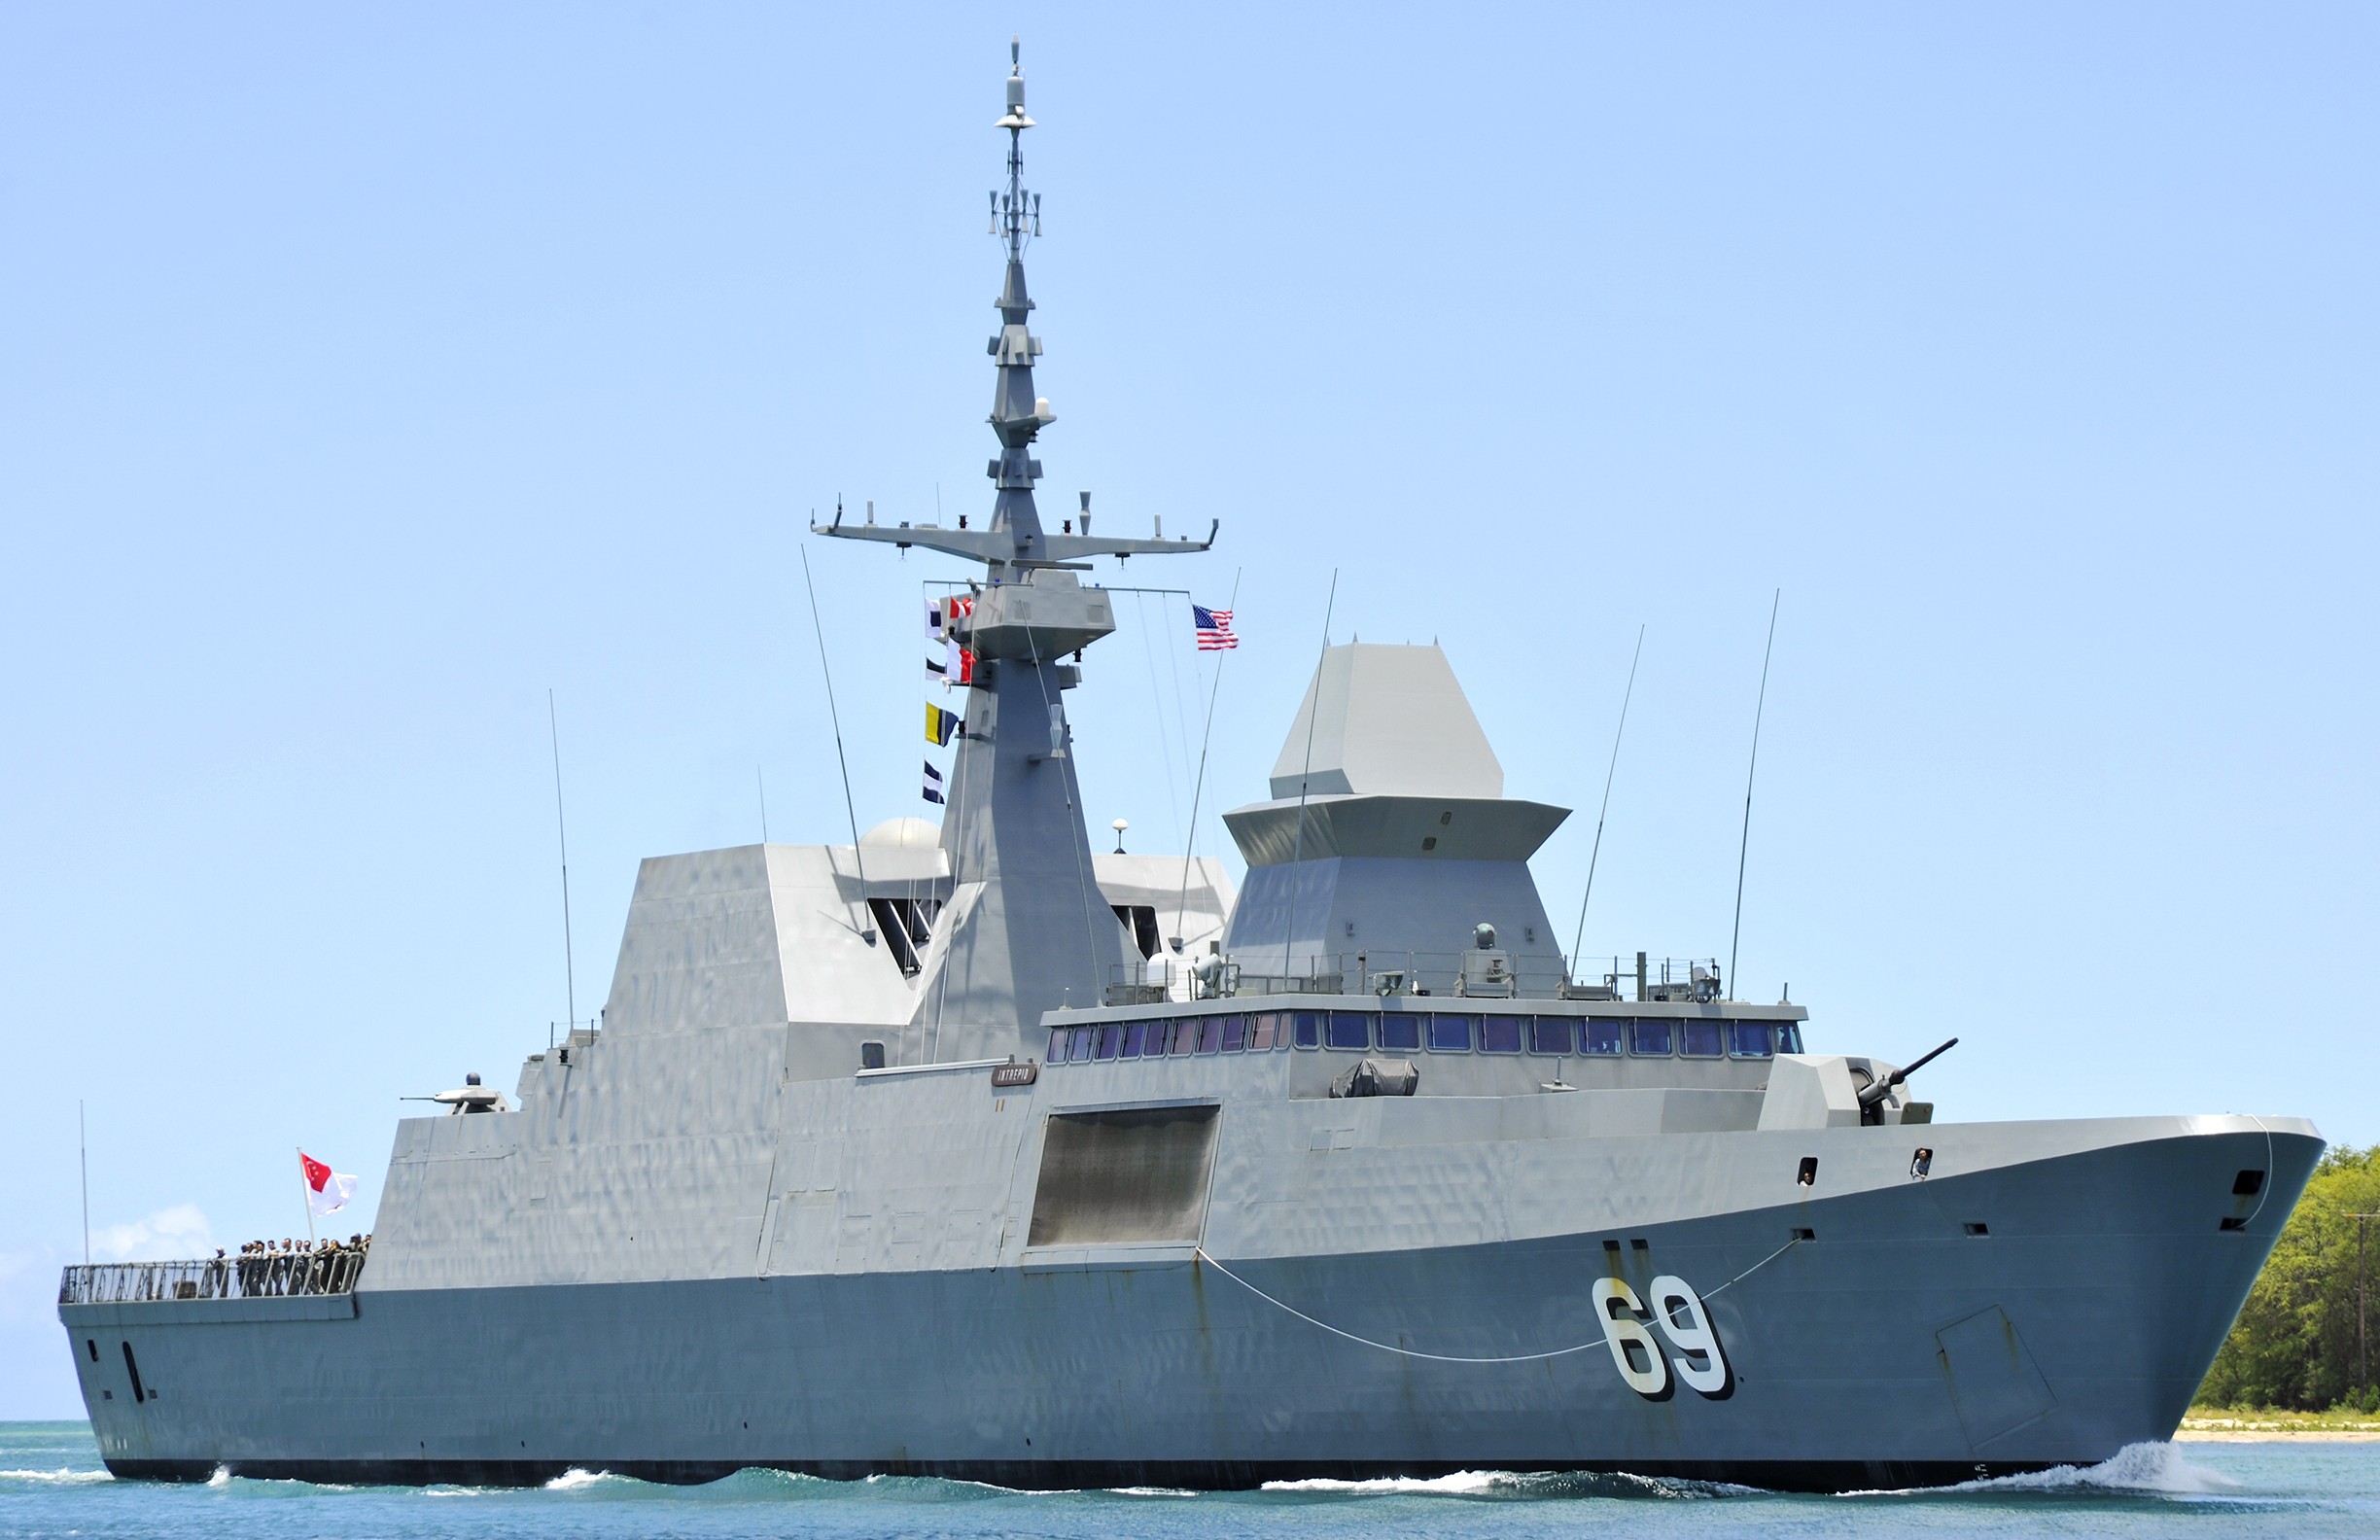 69 rss intrepid formidable class multi-mission missile frigate ffg republic singapore navy 06